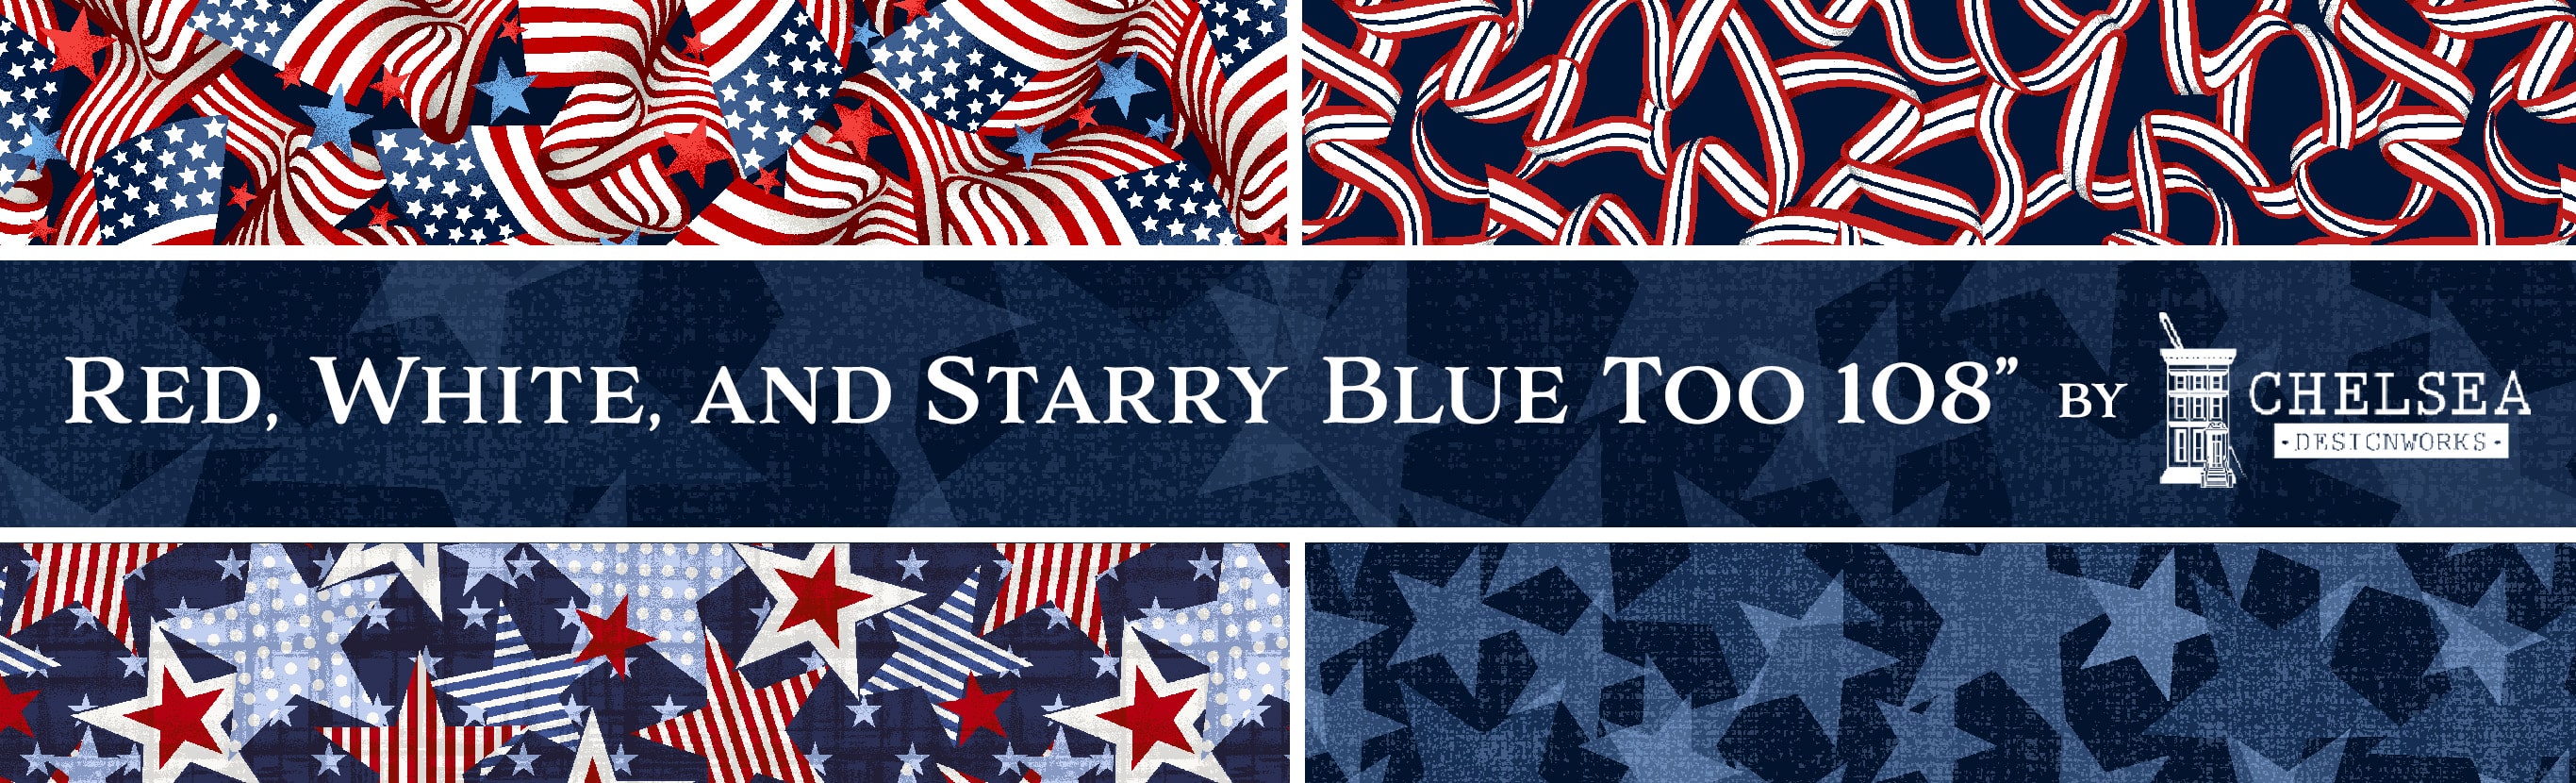 Red, White and Starry Blue Too 108